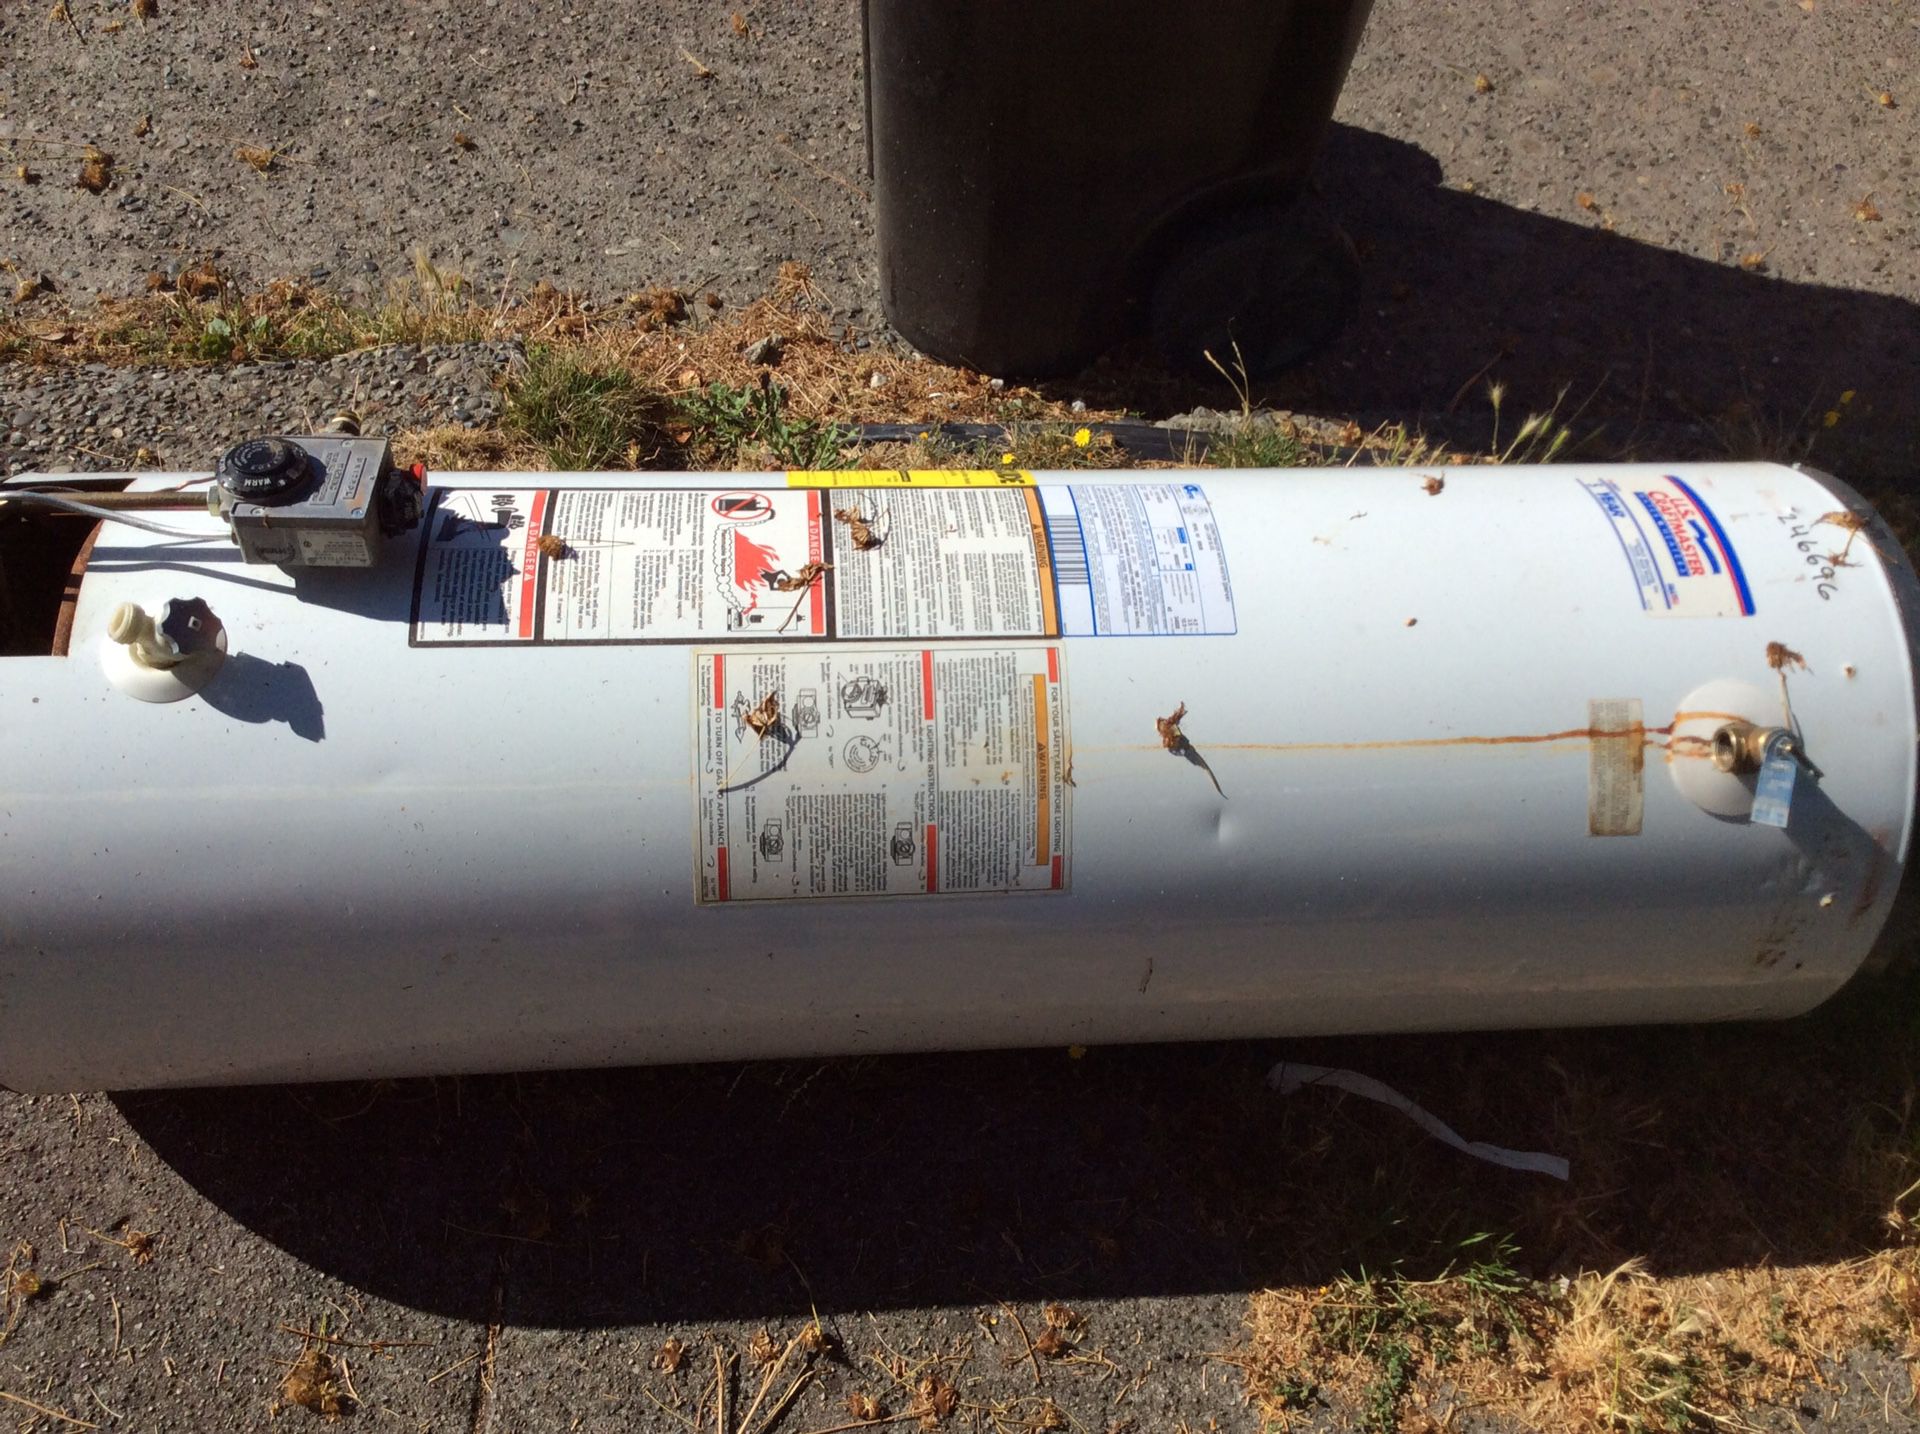 Free hot water heater for scrap 720 N 80th st Seattle 98103